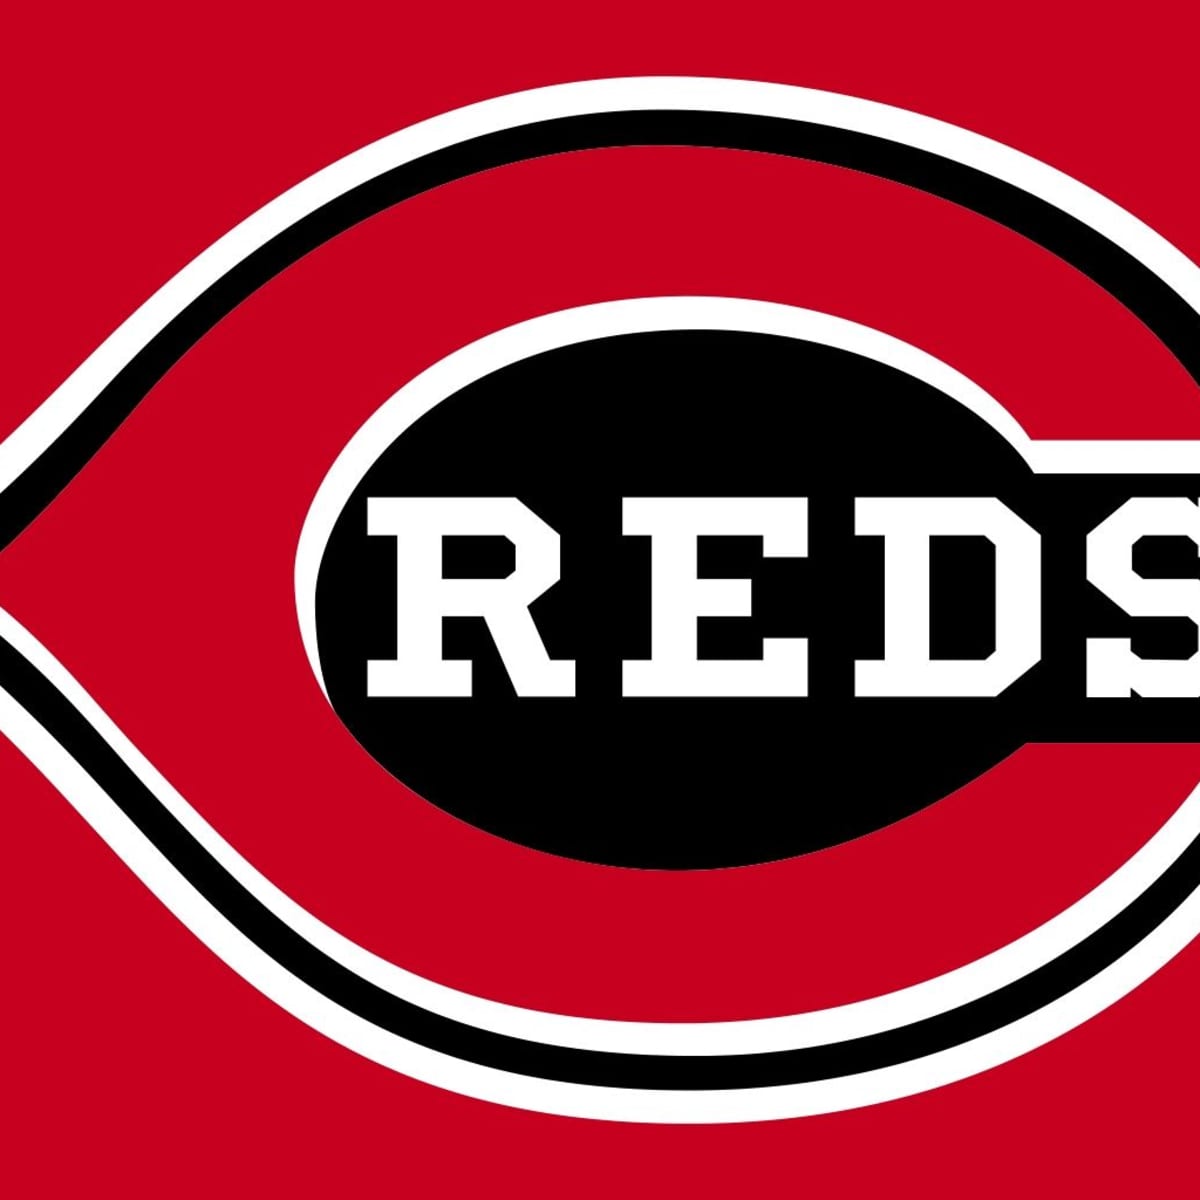 MLB's First Team: The Cincinnati Reds - HubPages